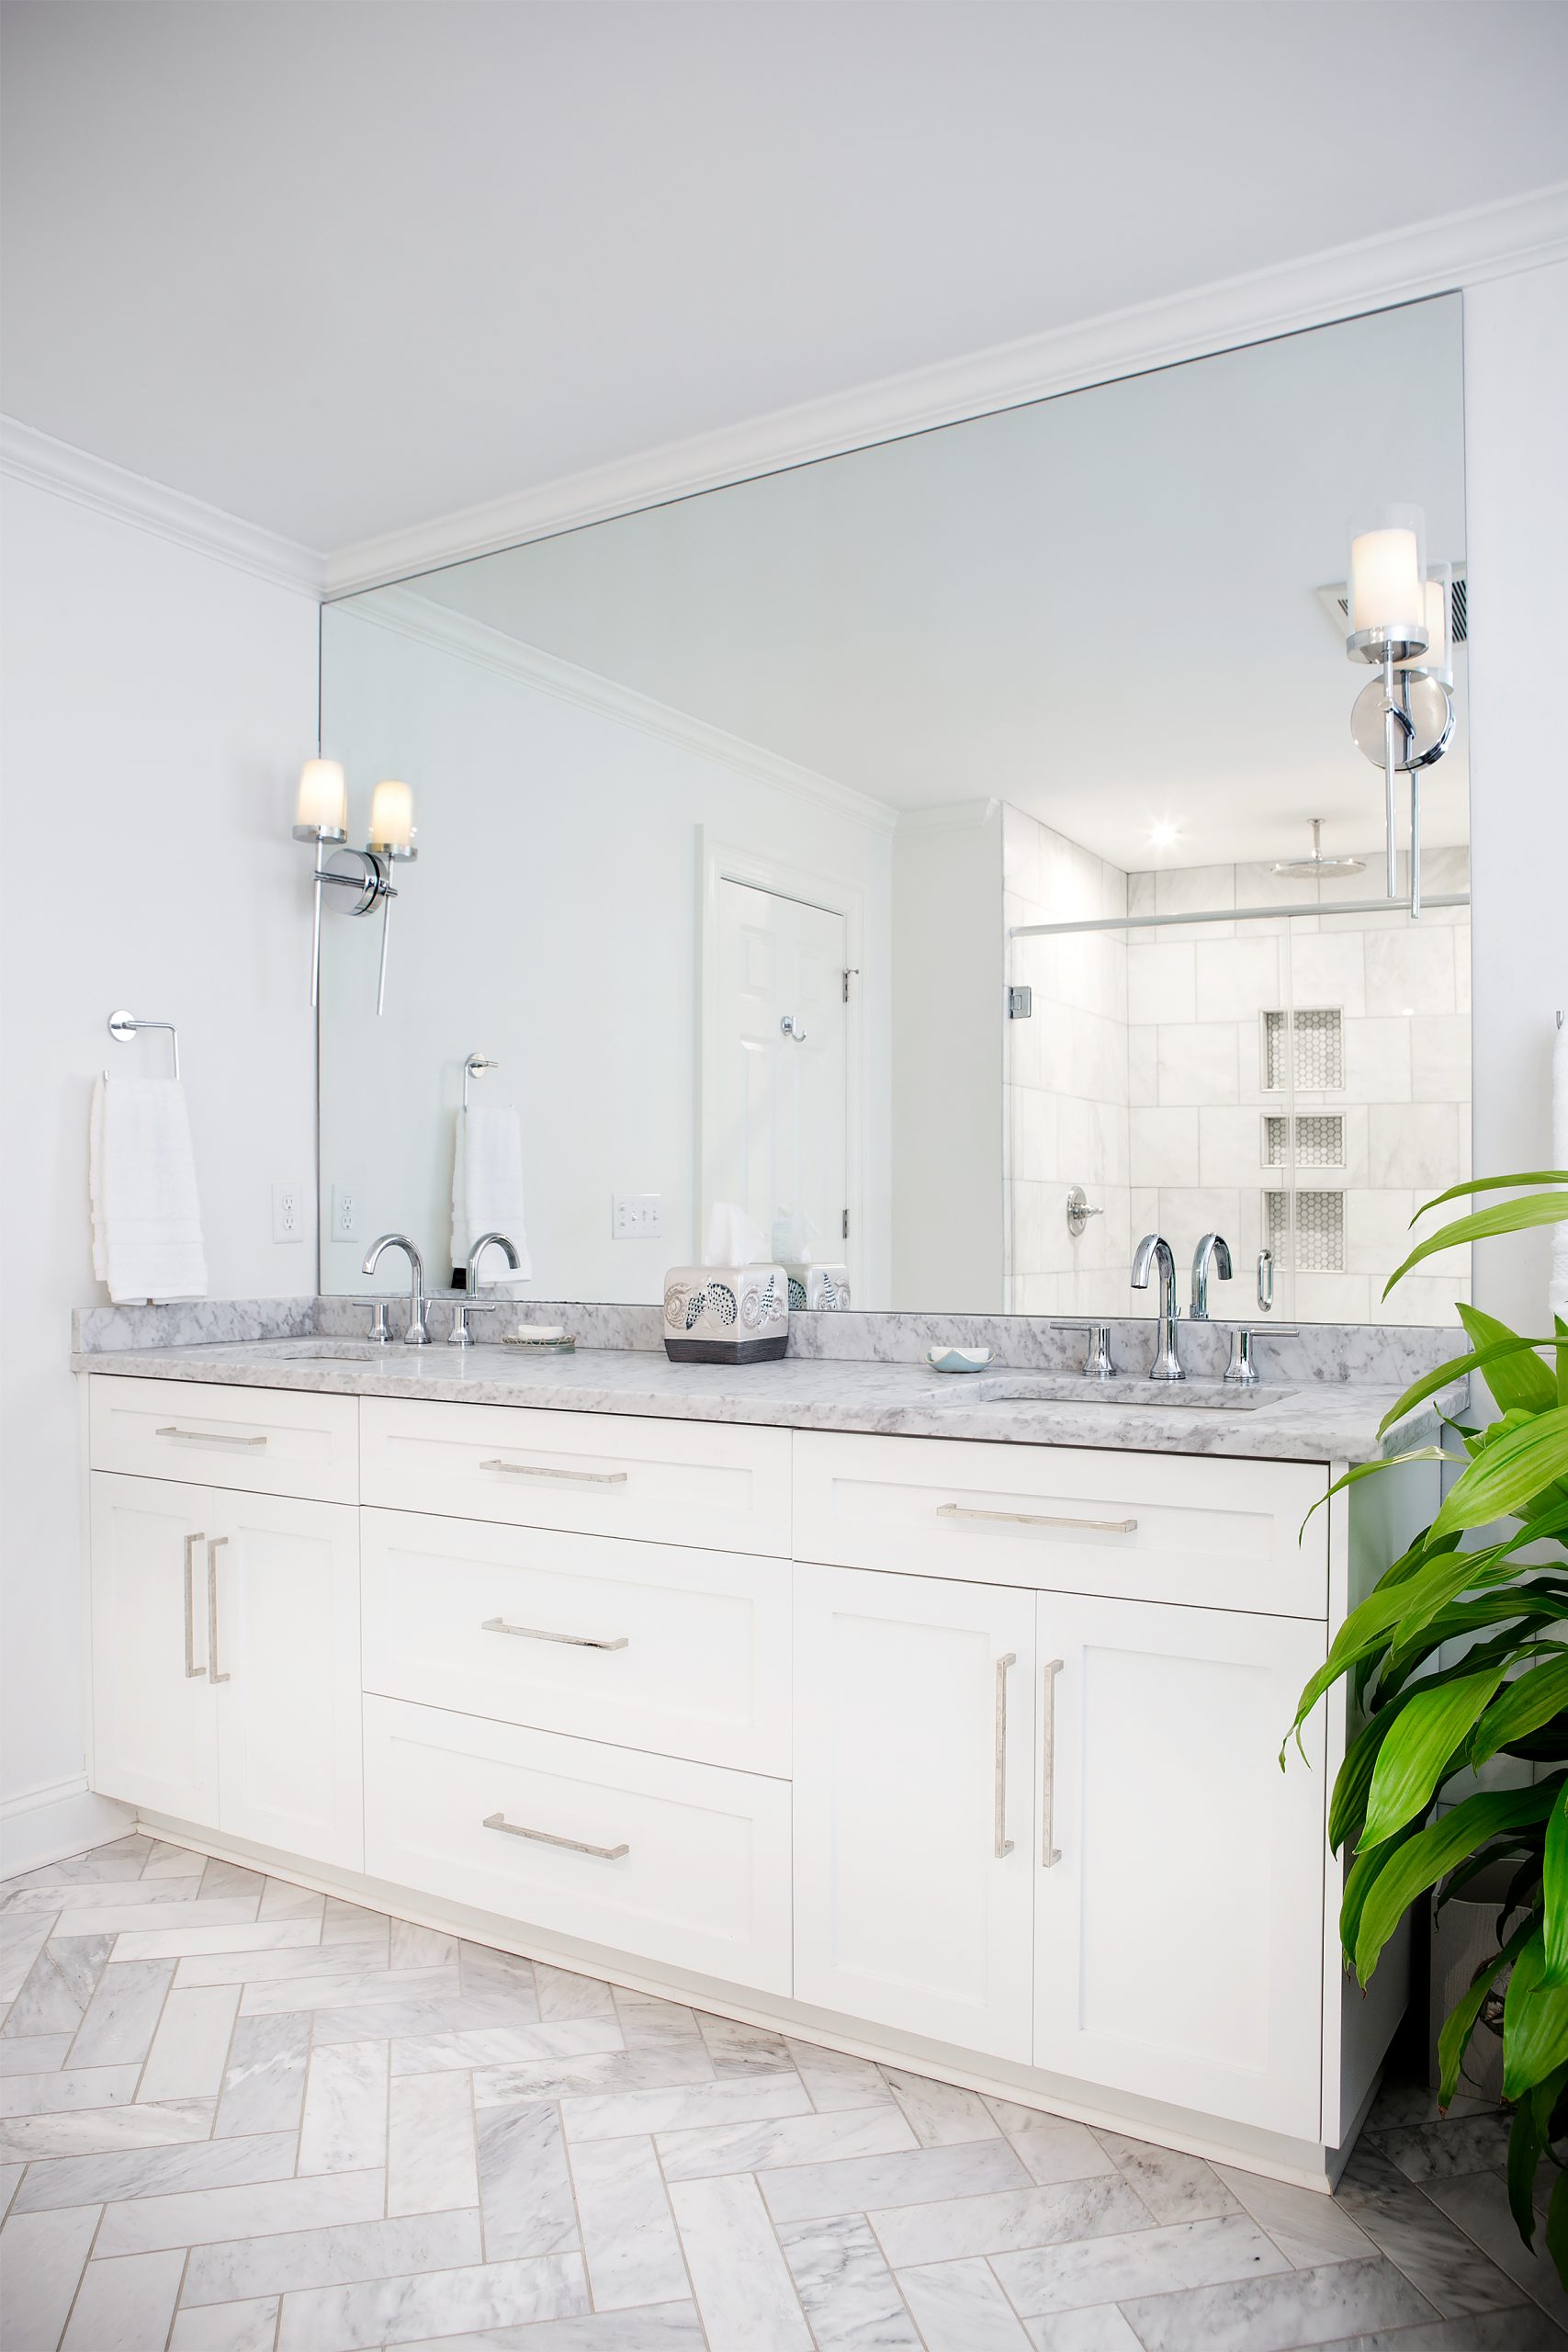 Lucas Bunch turned the former master bedroom into a master bathroom. The beautiful herringbone-patterned floor, two-sink vanity, and walls are all Carrara marble. 